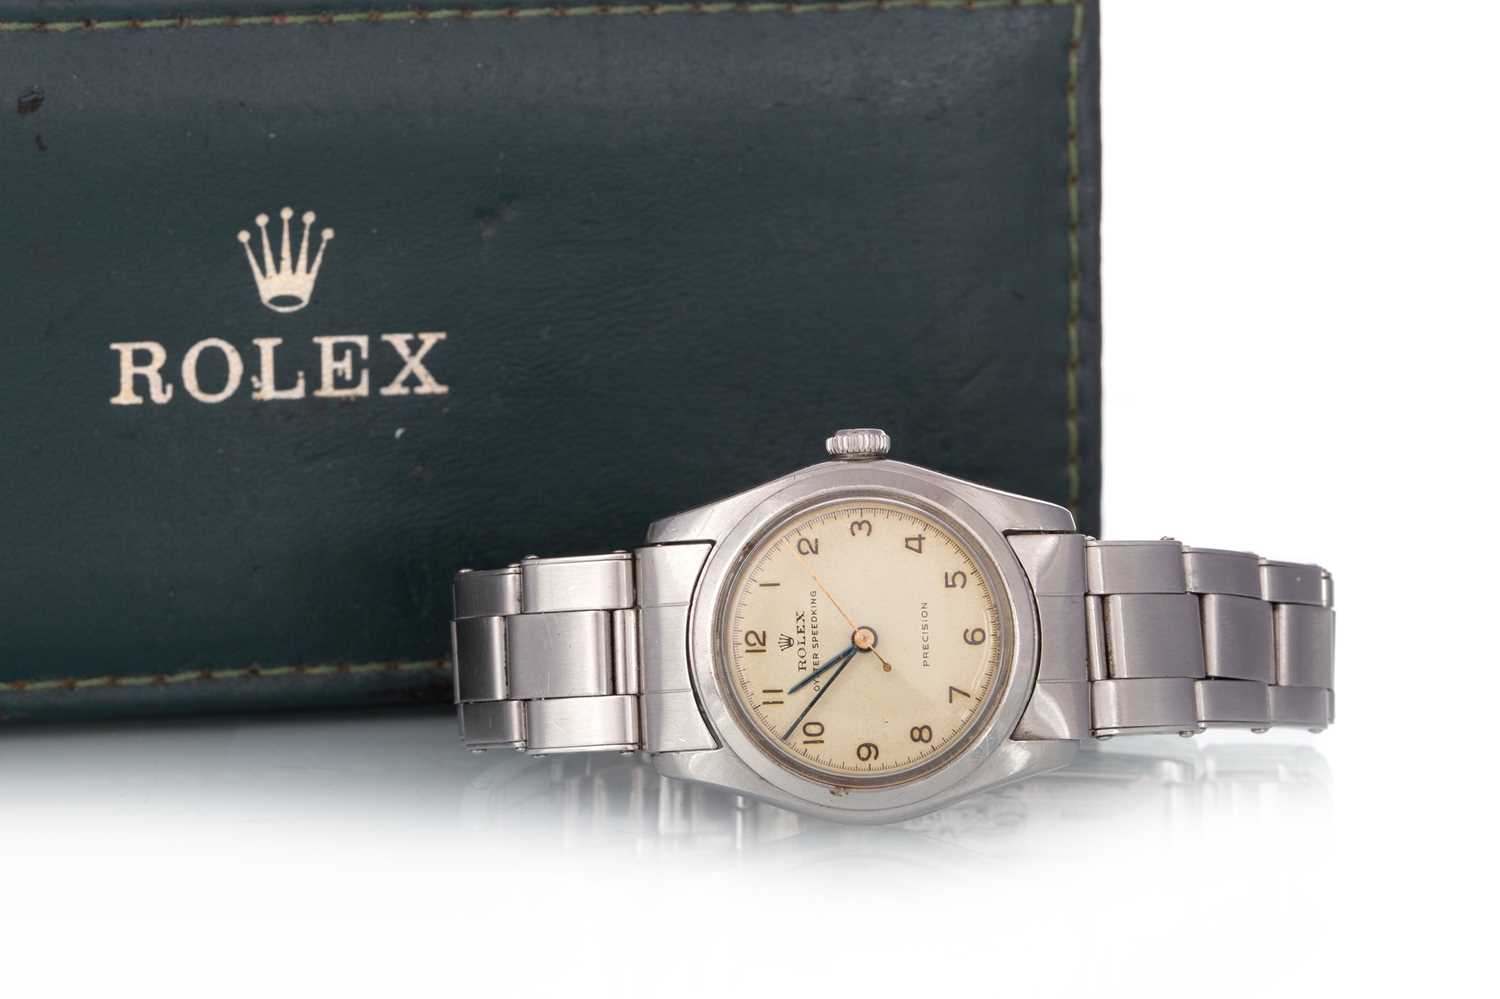 ROLEX OYSTER SPEEDKING STAINLESS STEEL MANUAL WIND WRIST WATCH, - Image 2 of 2